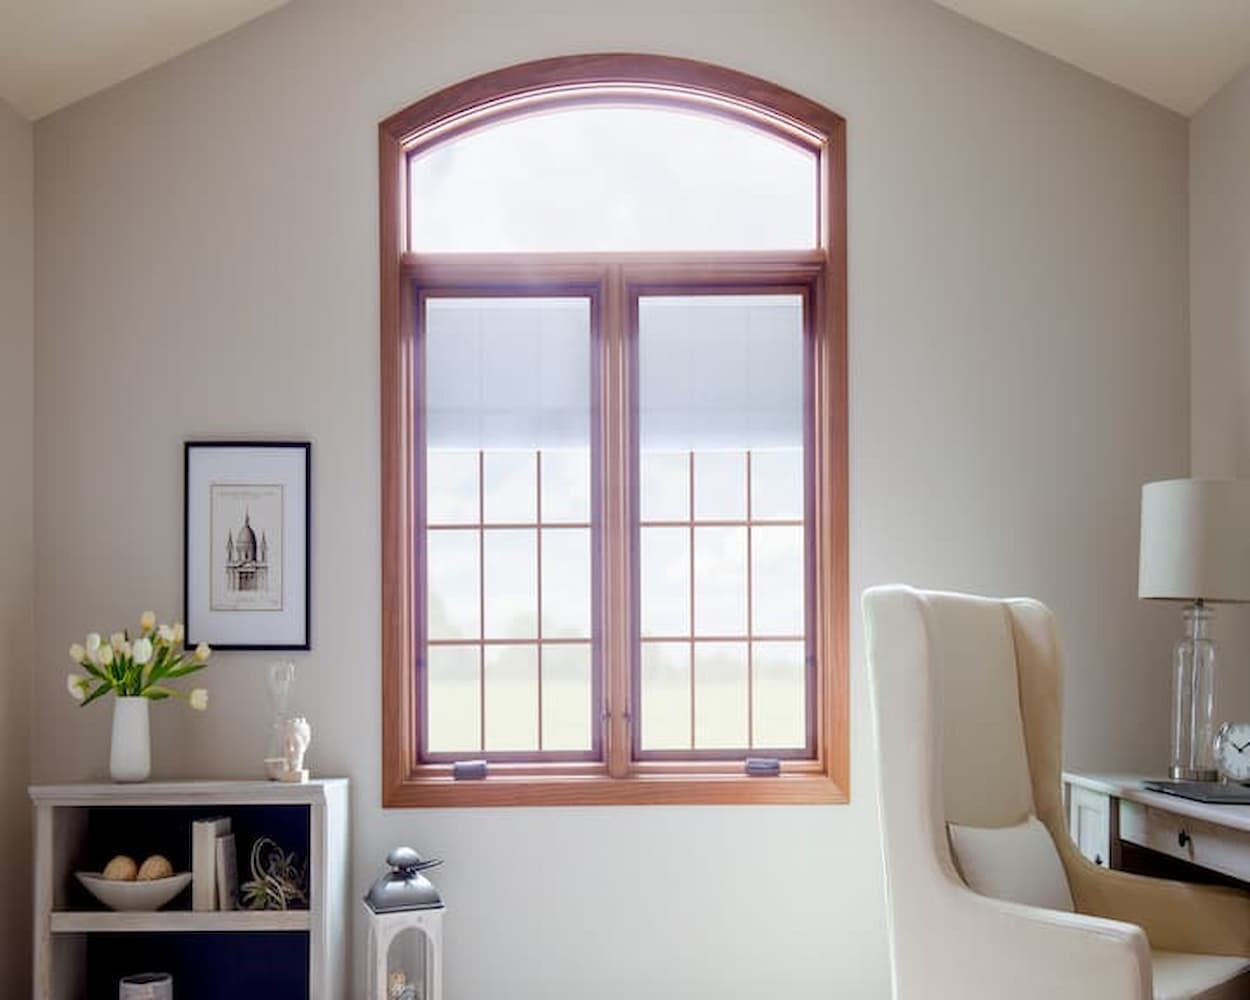 Natural stain wood window with blinds between the glass in office